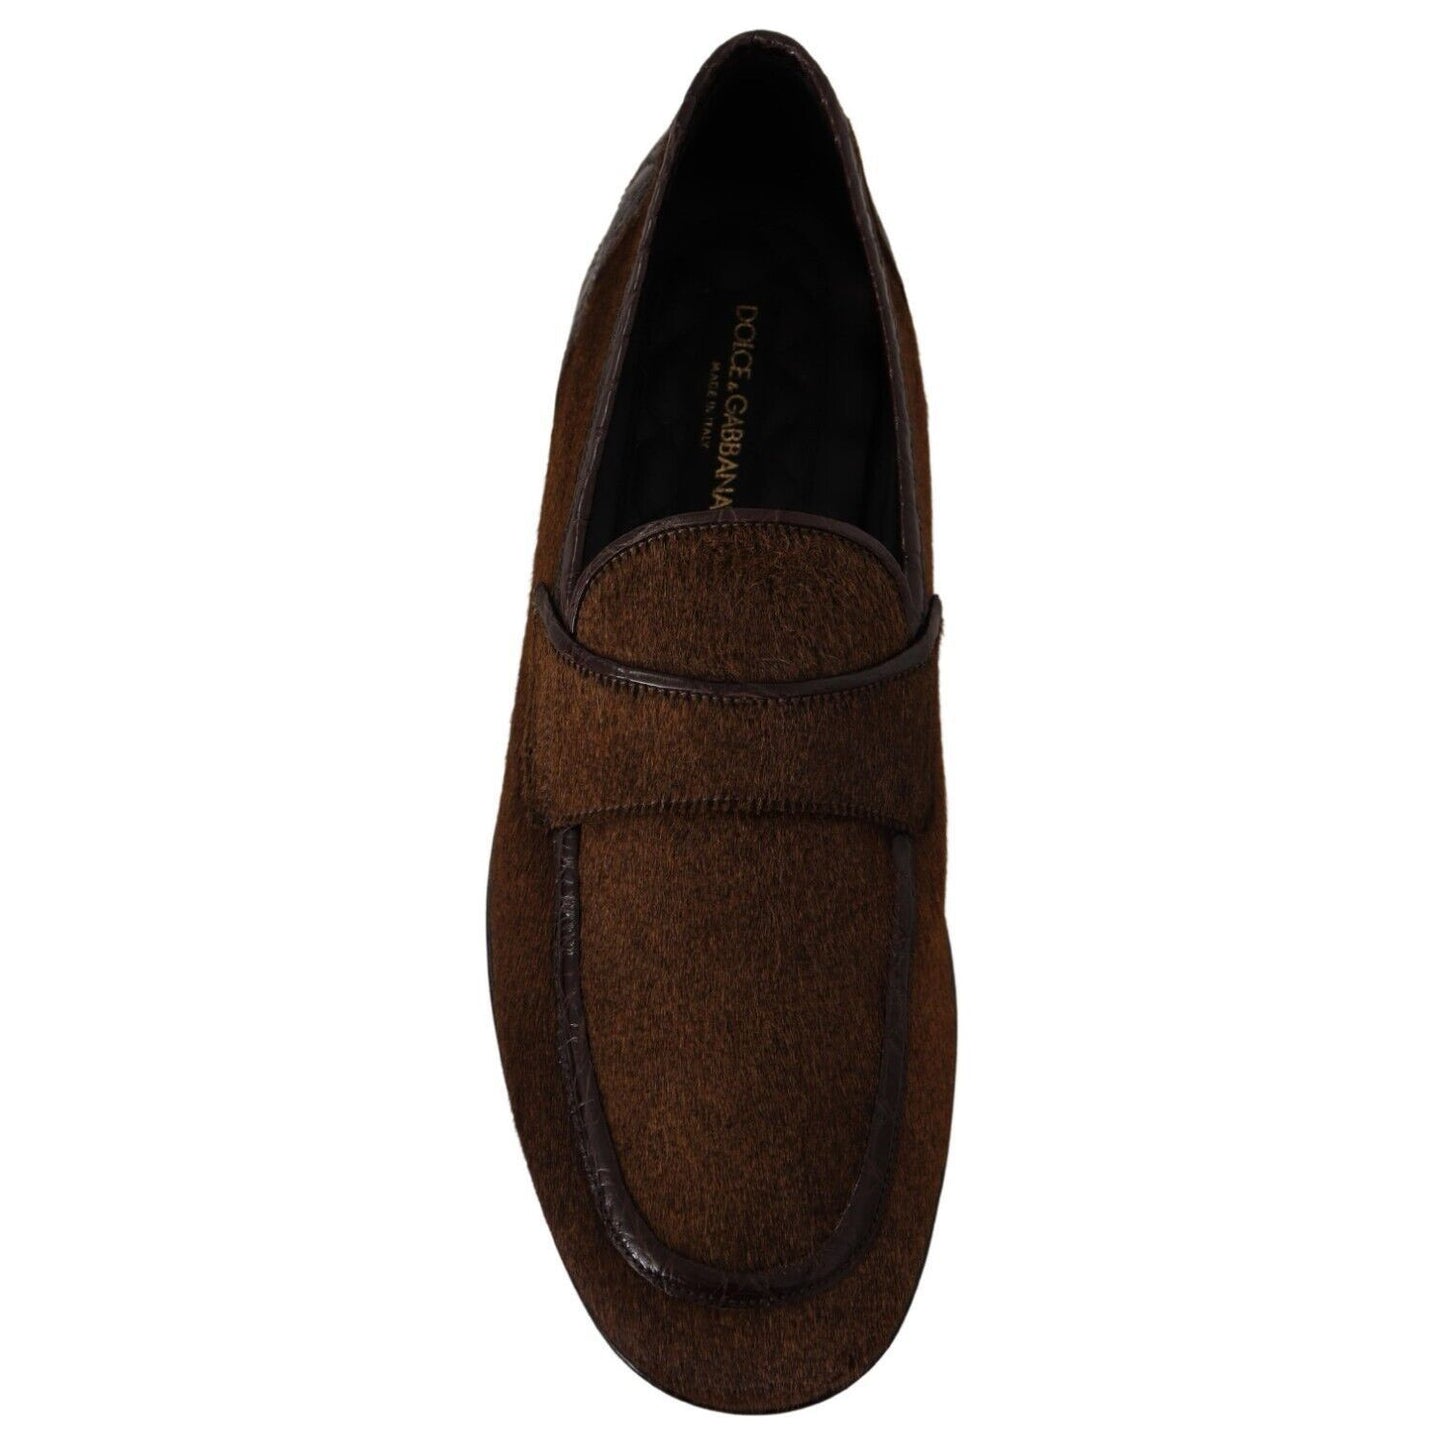 Dolce & Gabbana Exquisite Exotic Leather Loafers brown-exotic-leather-mens-slip-on-loafers-shoes